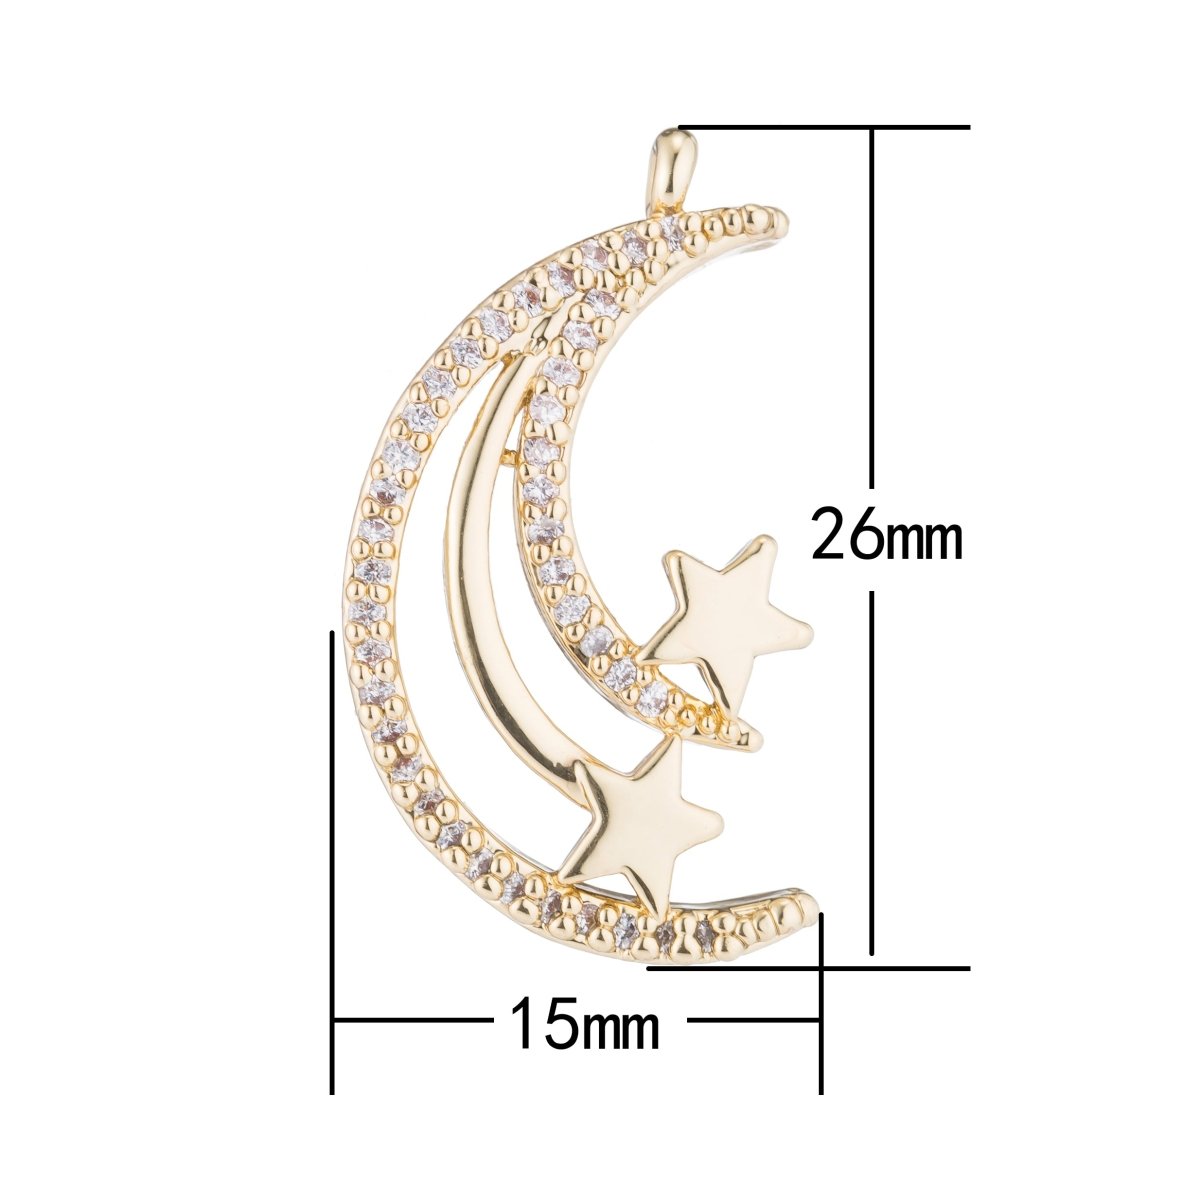 1pc Gold / Silver Shooting Star Shine Bright Wish Starry Night Cubic Zirconia Bracelet Necklace Pendant Charm Bead Bails Finding for Jewelry MakingC-196 - DLUXCA